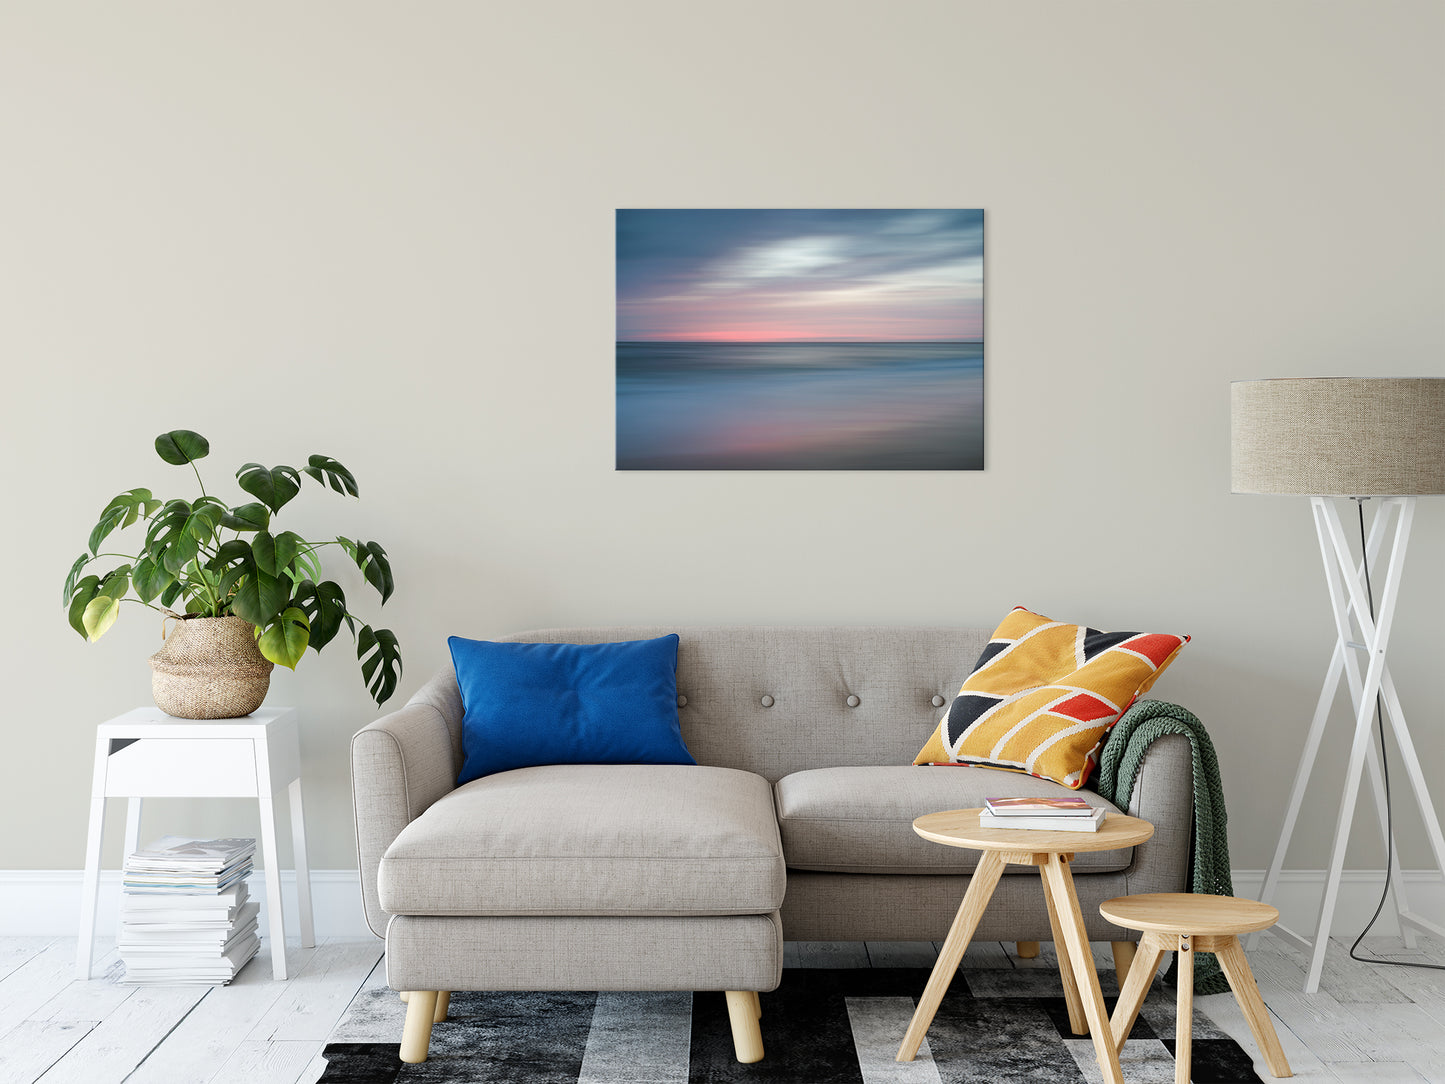 Pink and Blue Beach - Ocean - Coastal Abstract Landscape Fine Art Canvas Wall Art Prints - The Colors of Evening 24" x 36" - PIPAFINEART